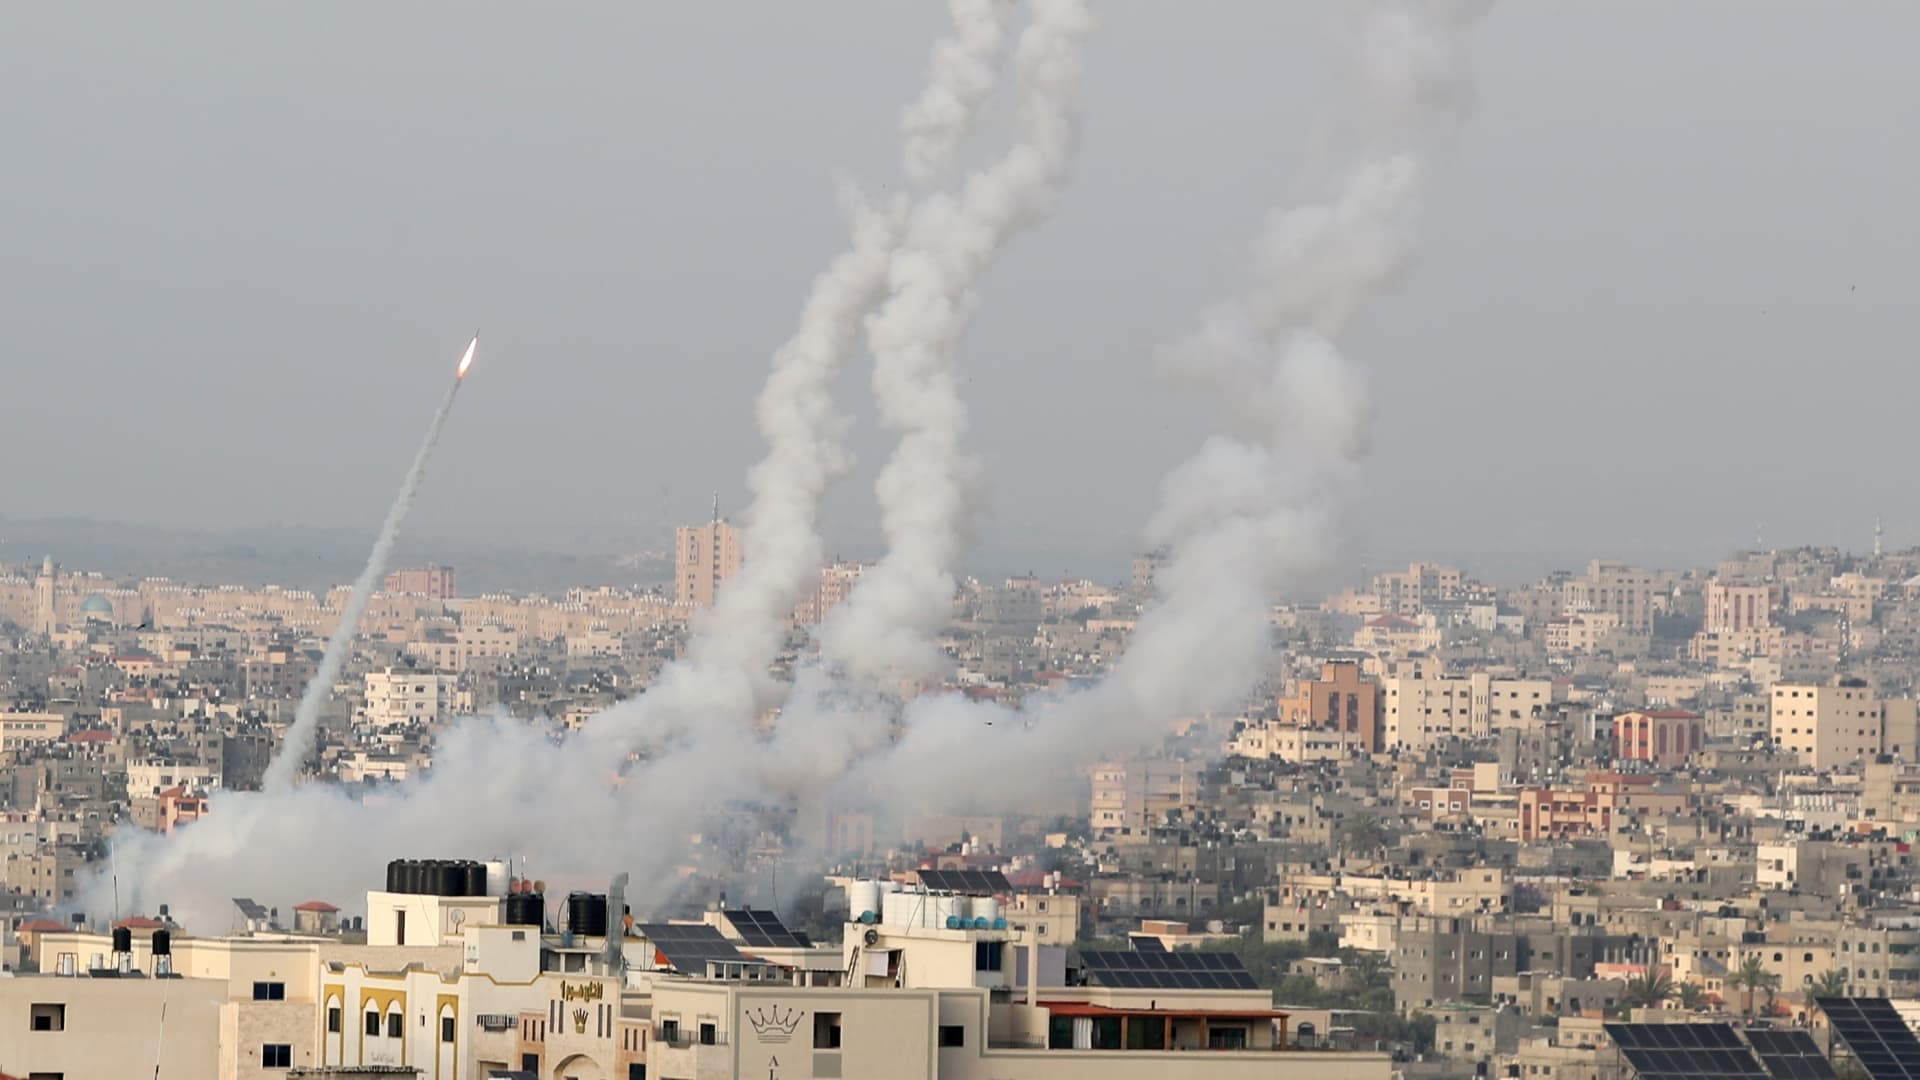 Rockets are launched by Palestinian militants from Gaza into Israel, May 10, 2021.